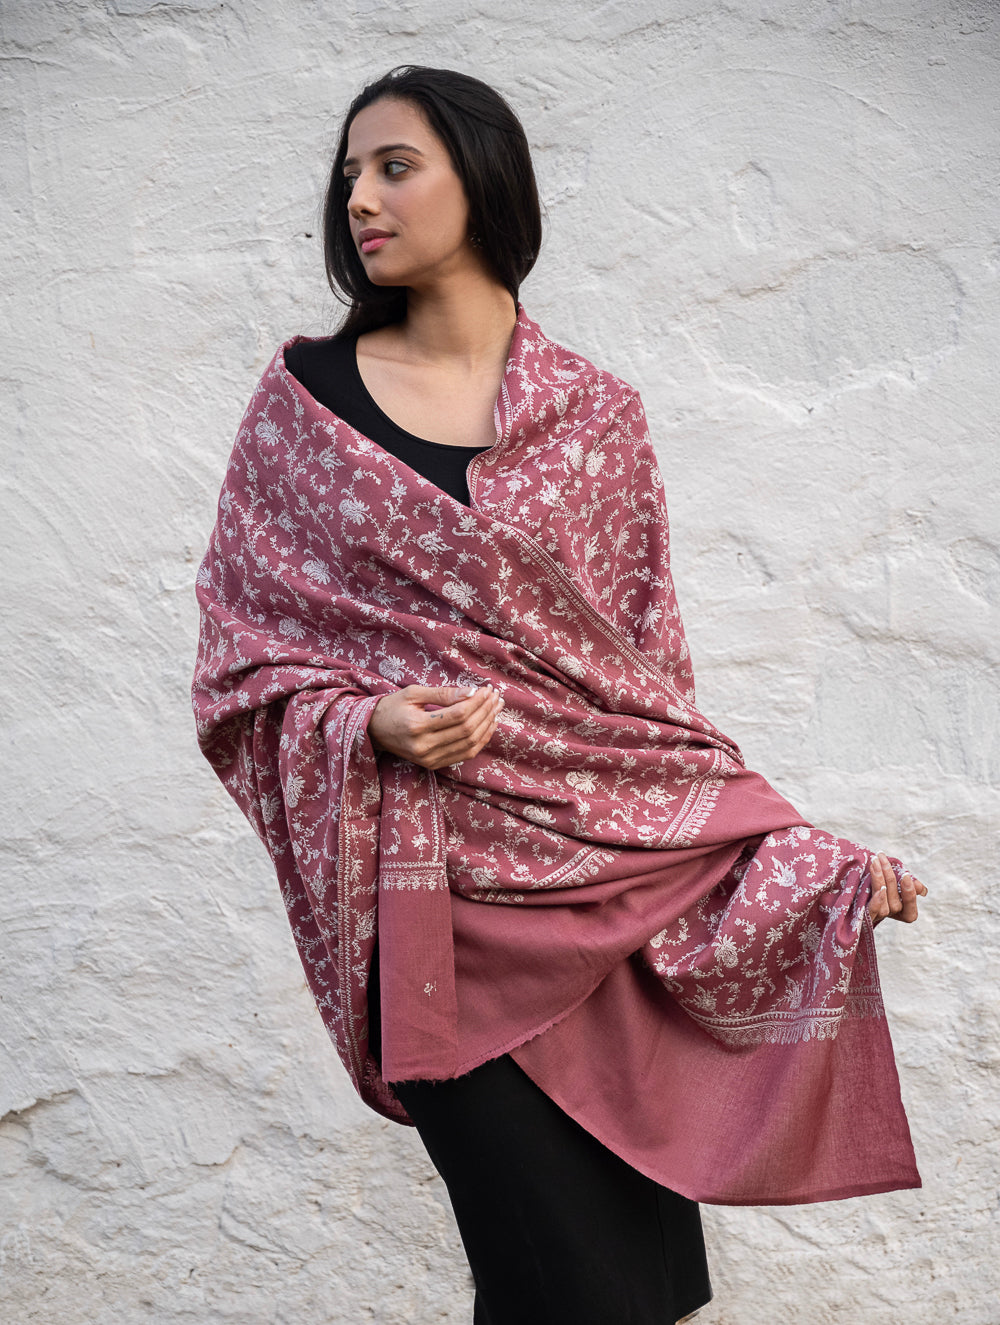 Load image into Gallery viewer, Exclusive, Fine Hand Embroidered Kashmiri Shawl - Regal Pink 